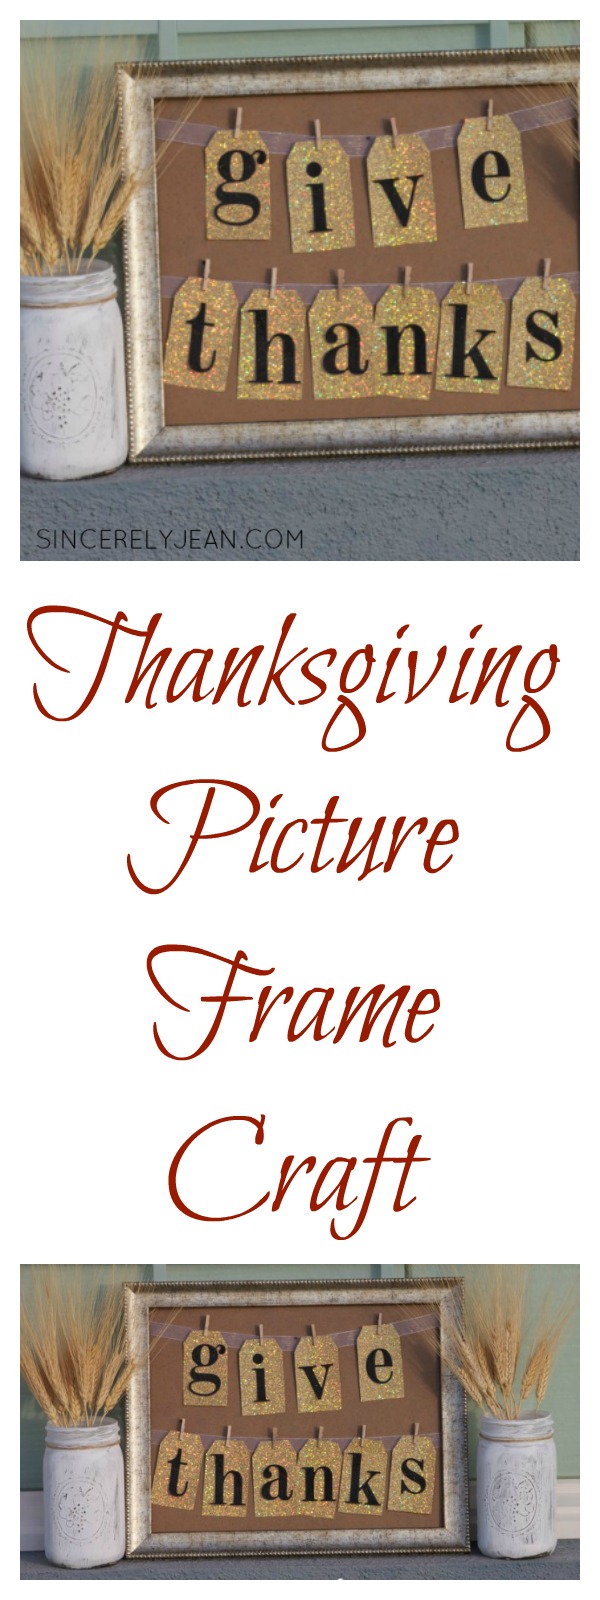 Thanksgiving_Picture_Frame_Craft